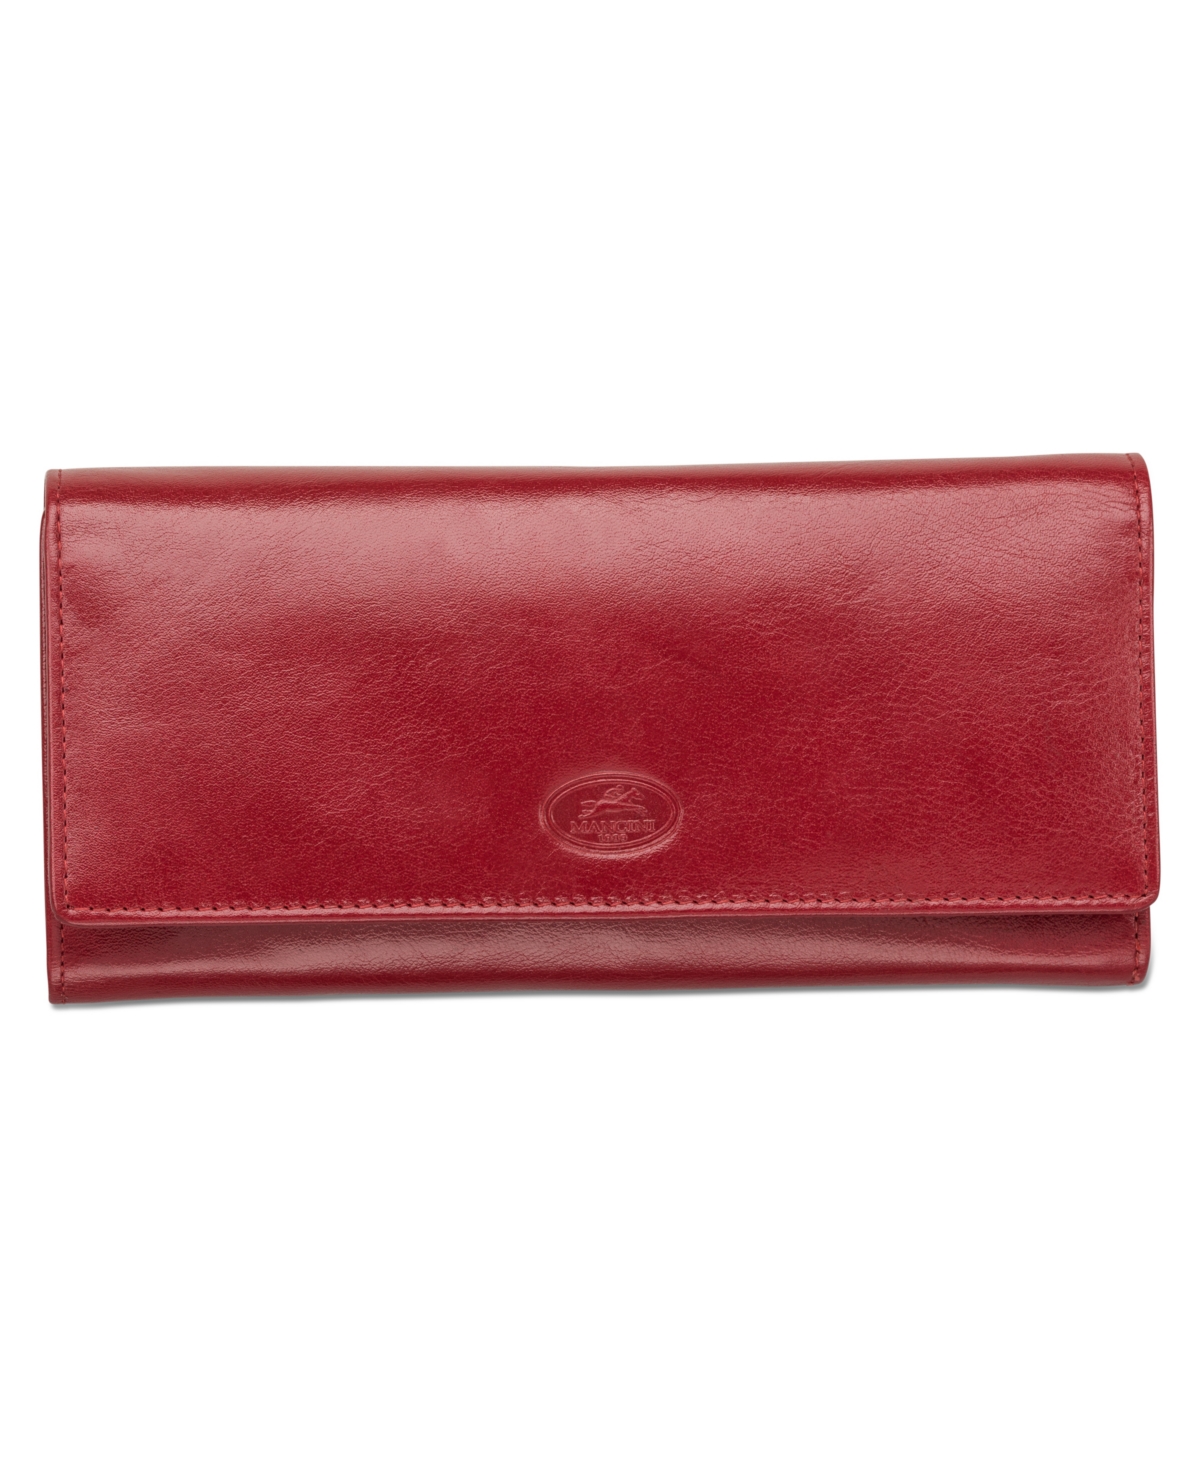 Equestrian-2 Collection Rfid Secure Trifold Wallet - Red